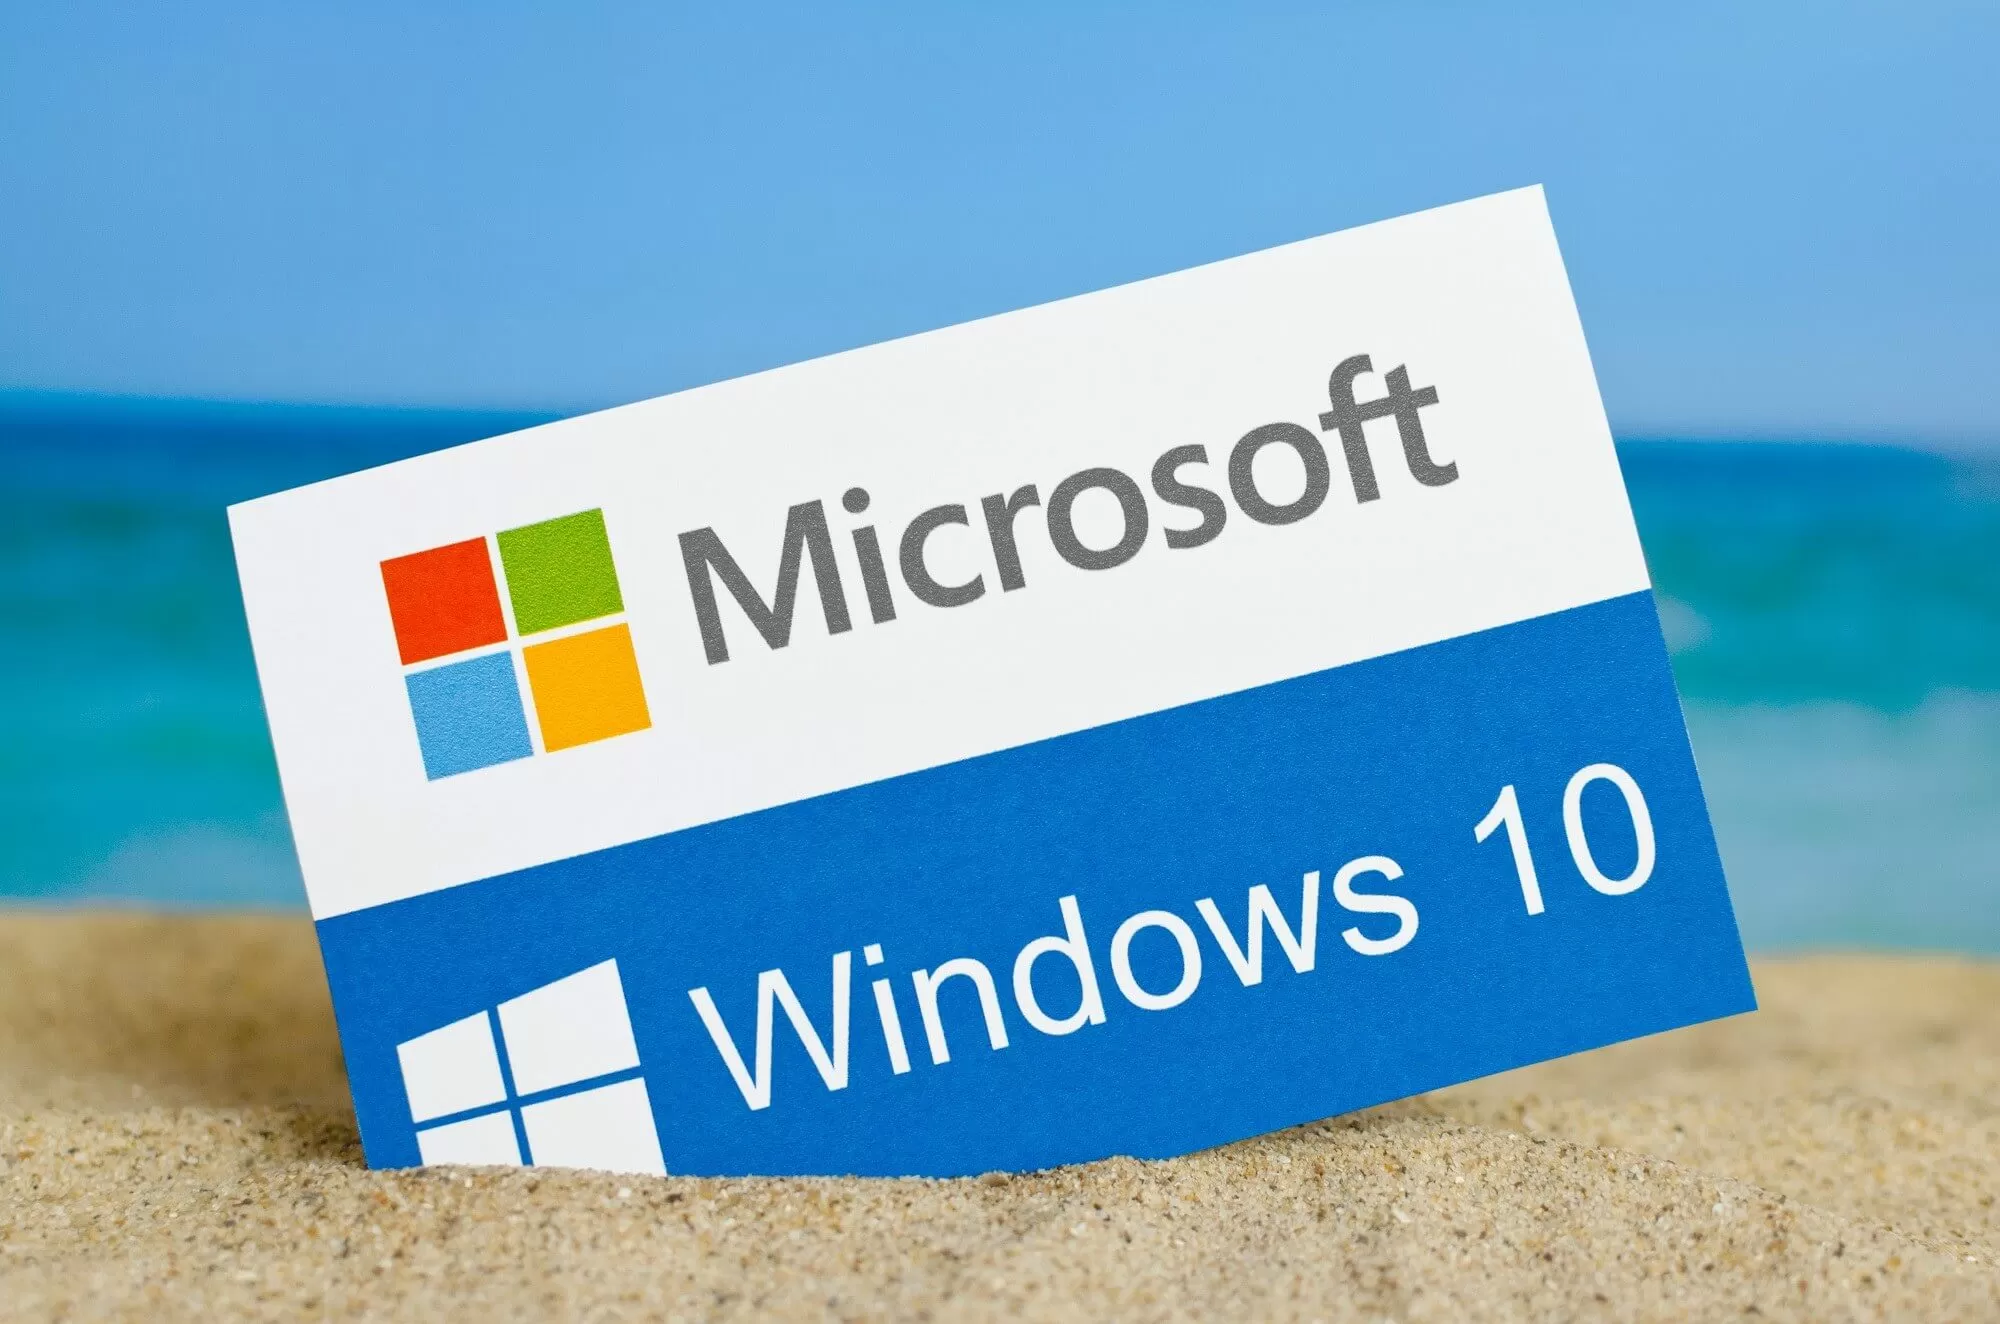 Microsoft is notifying users if their PC can't install the Windows 10 May update